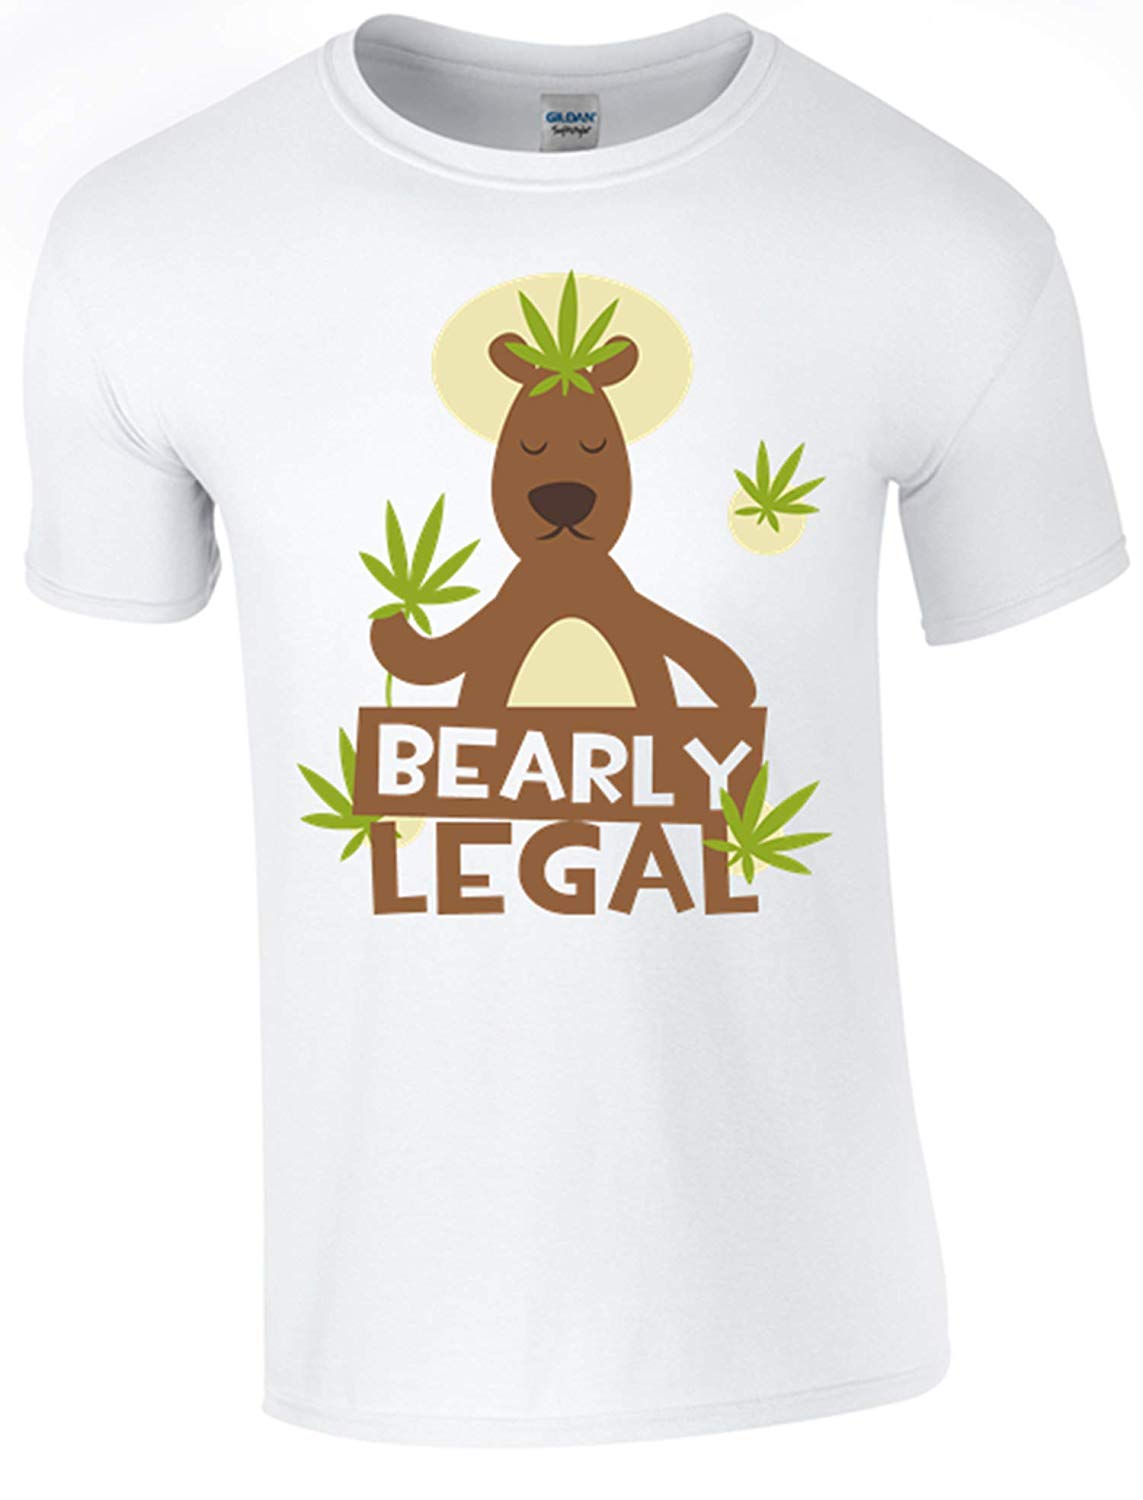 Bearly Legal T-Shirt - Army 1157 kit S Army 1157 Kit Veterans Owned Business